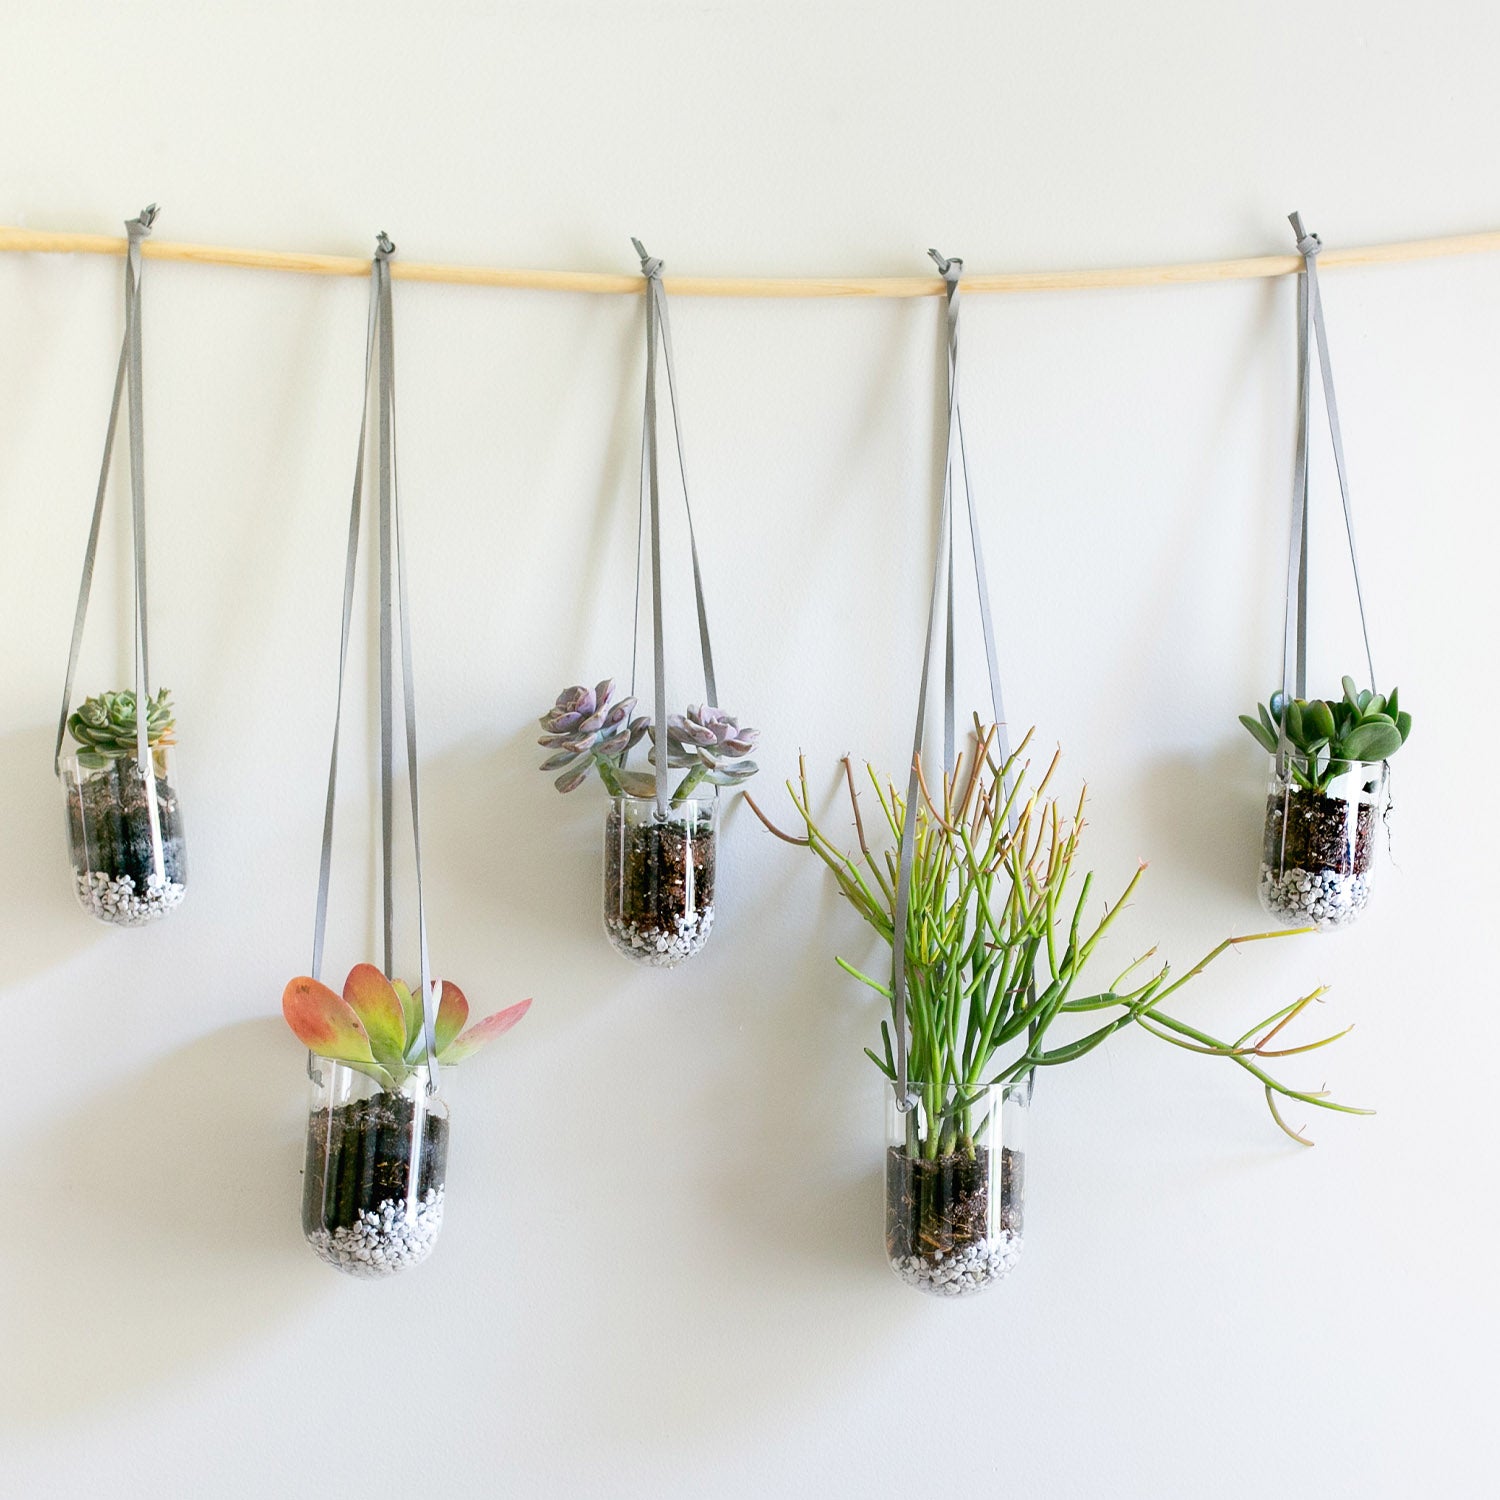  A modern indoor garden display with five hanging glass terrariums suspended from a wooden dowel by gray ropes. Each terrarium contains a variety of small succulents and plants, layered above stones and soil, creating a green living wall arrangement against a neutral backdrop.